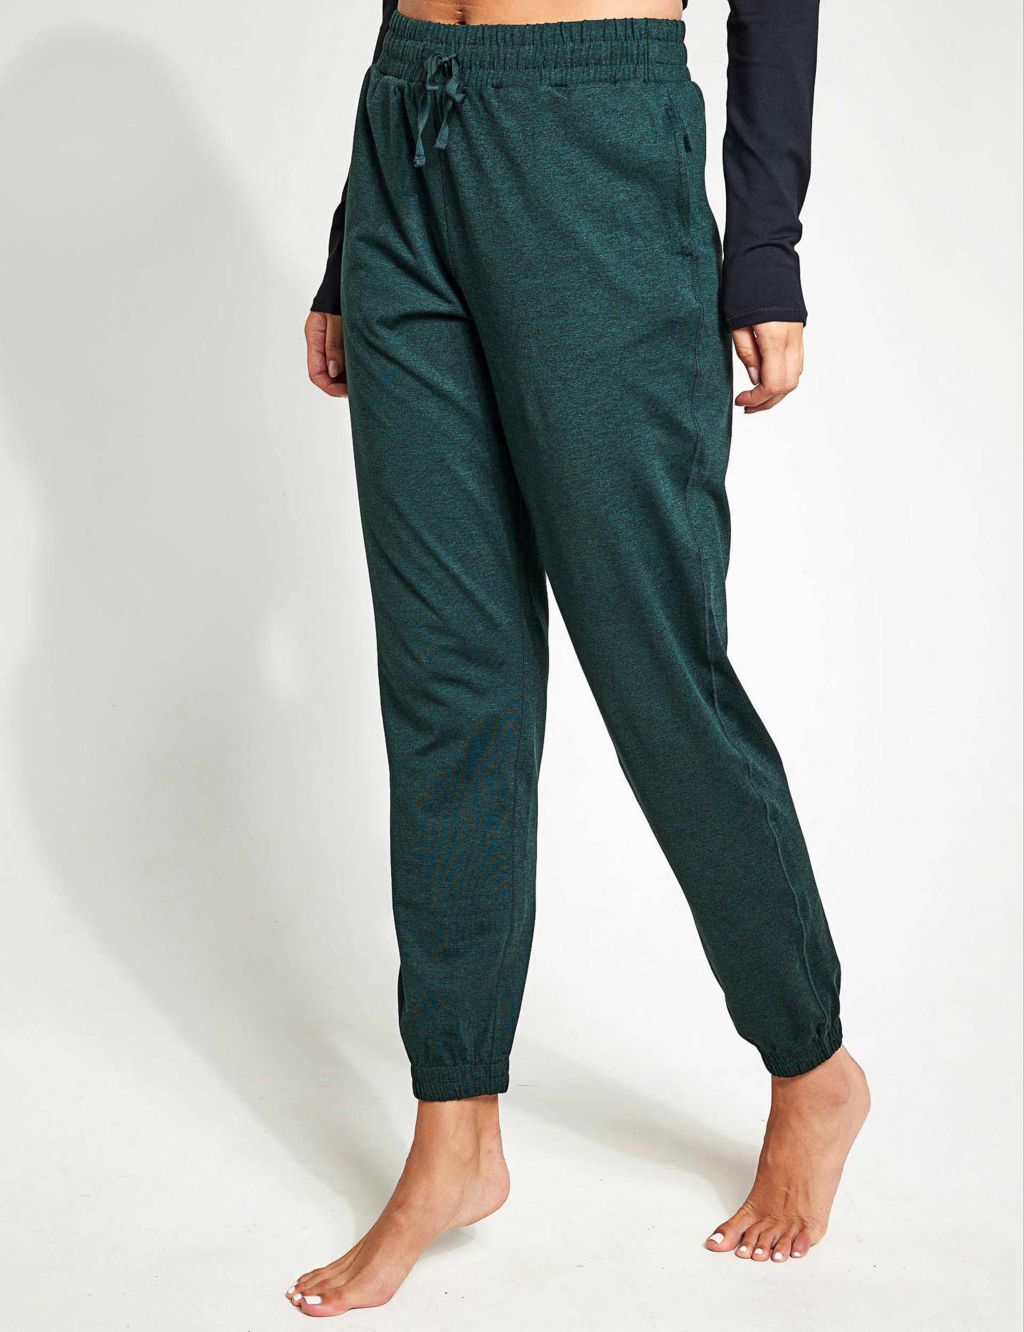 Reset Cuffed Joggers image 1